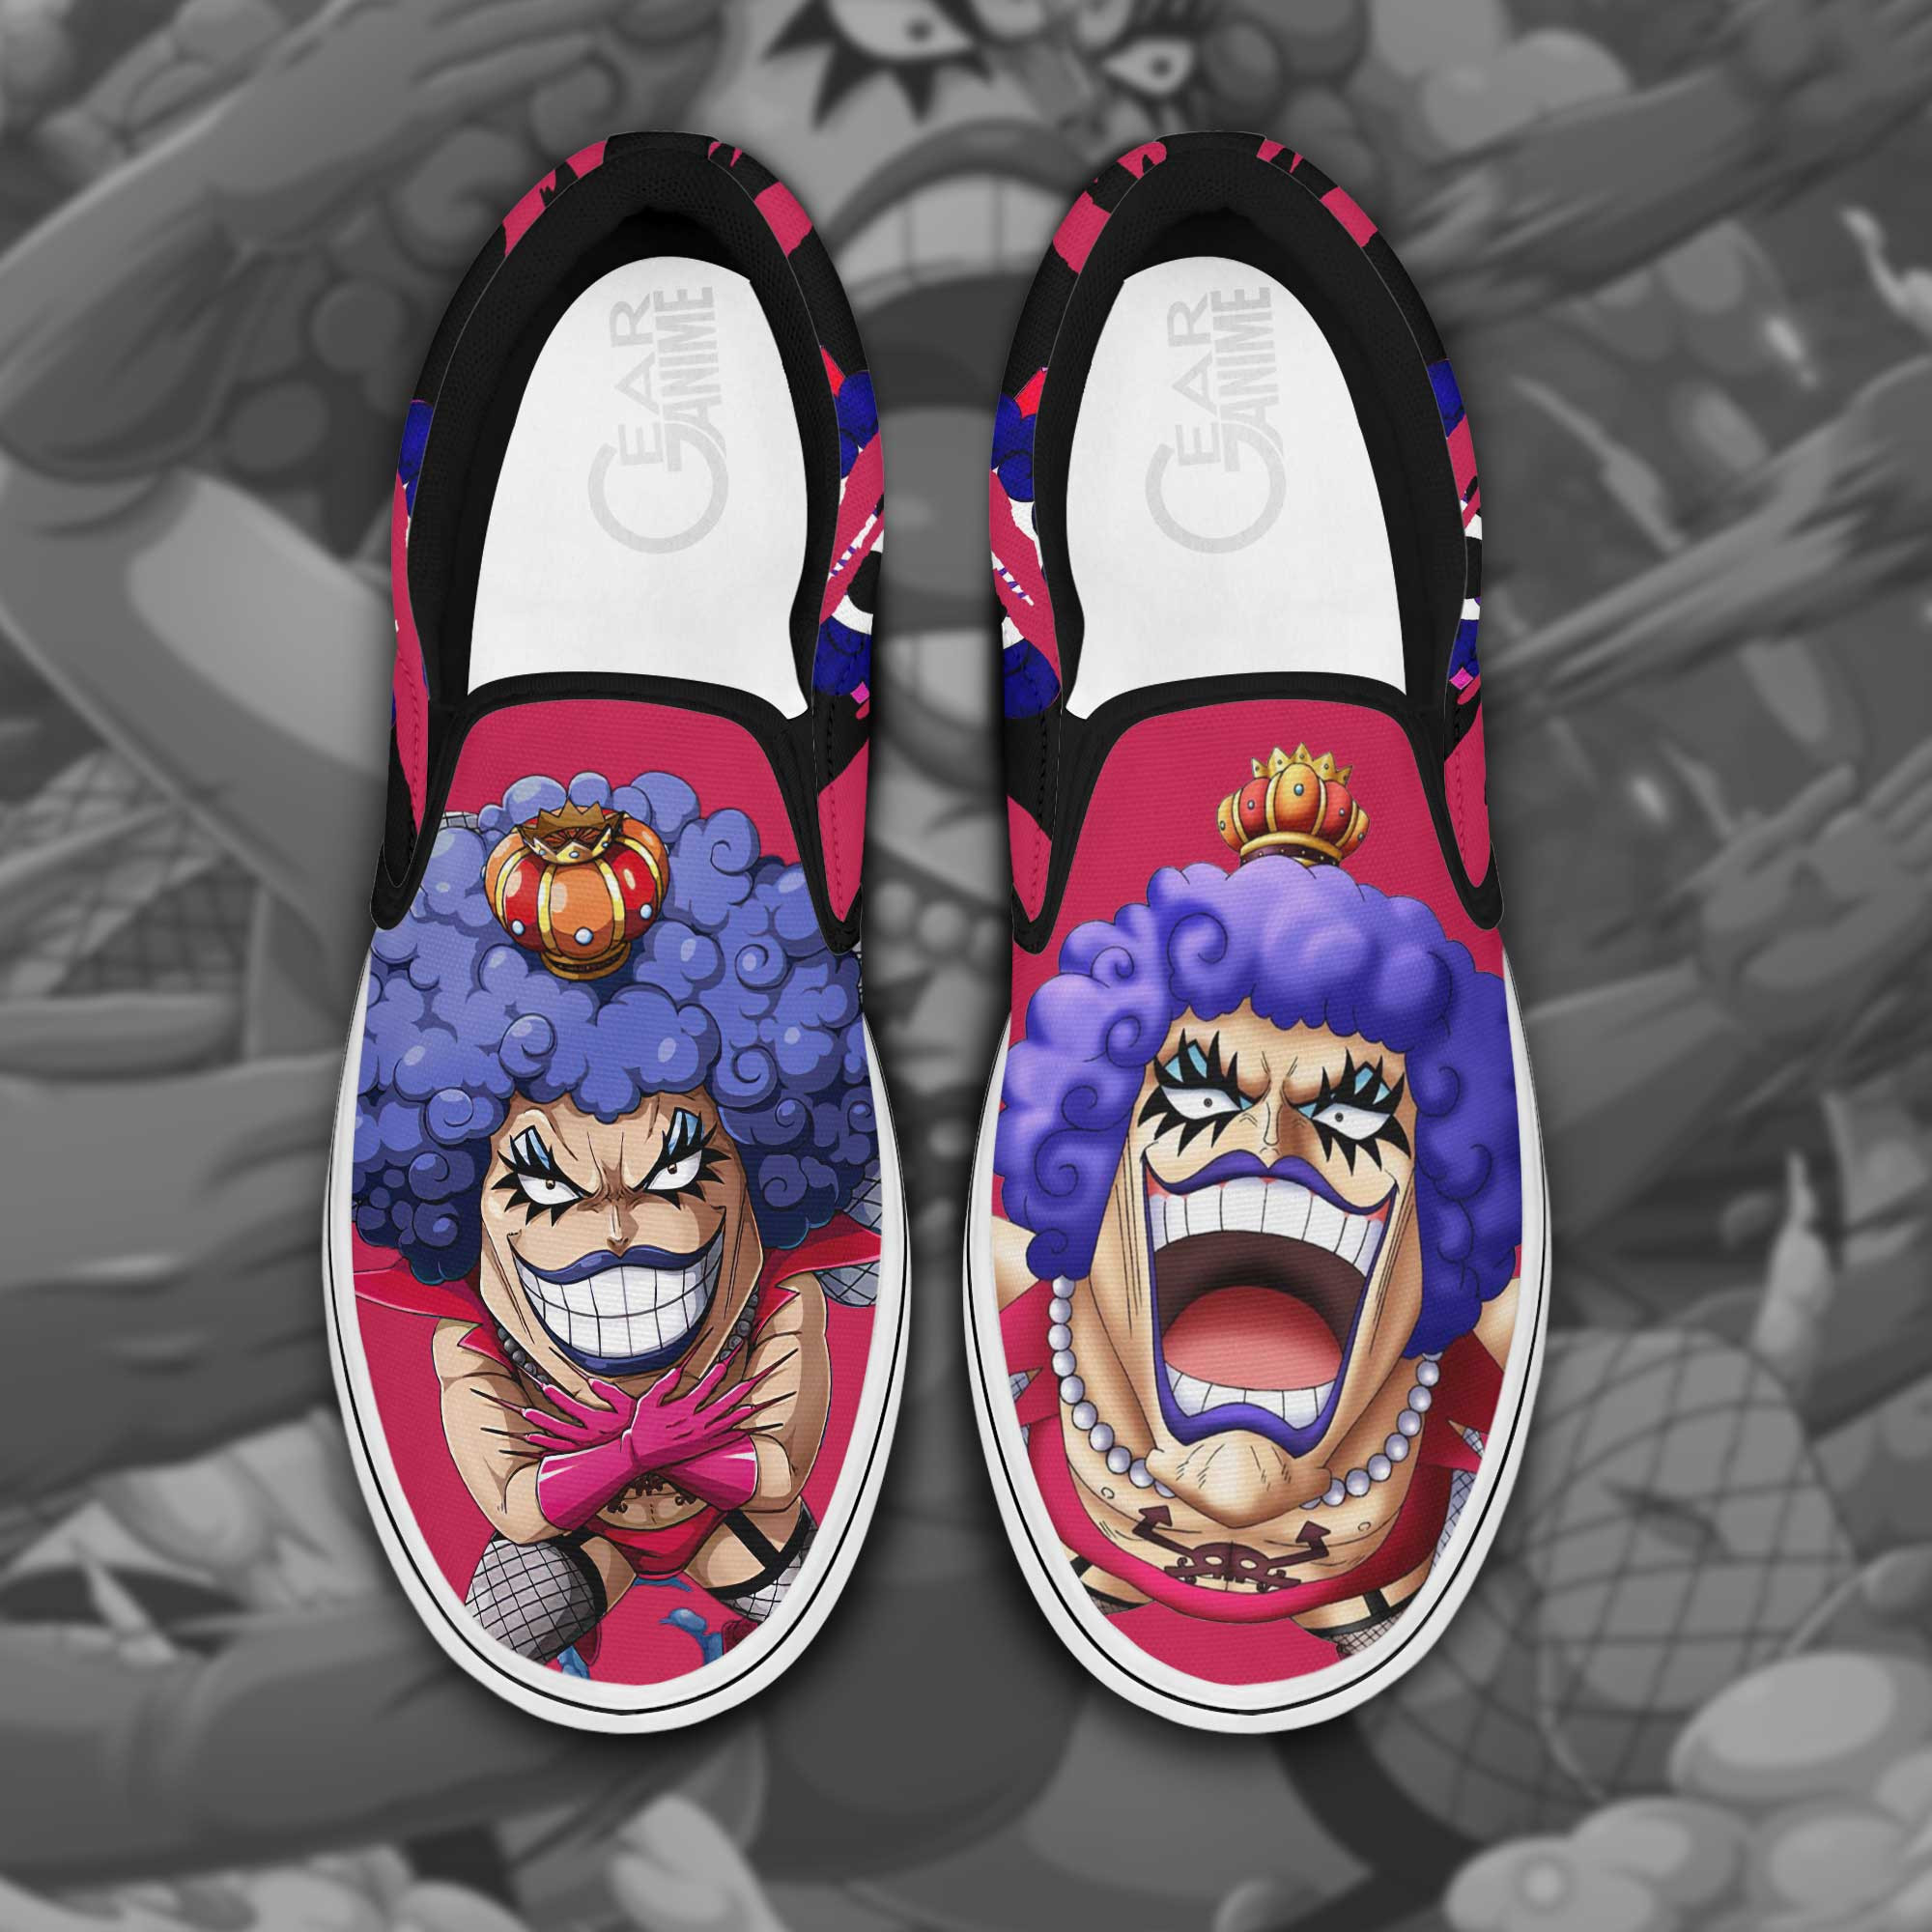 These Sneakers are a must-have for any Anime fan 83